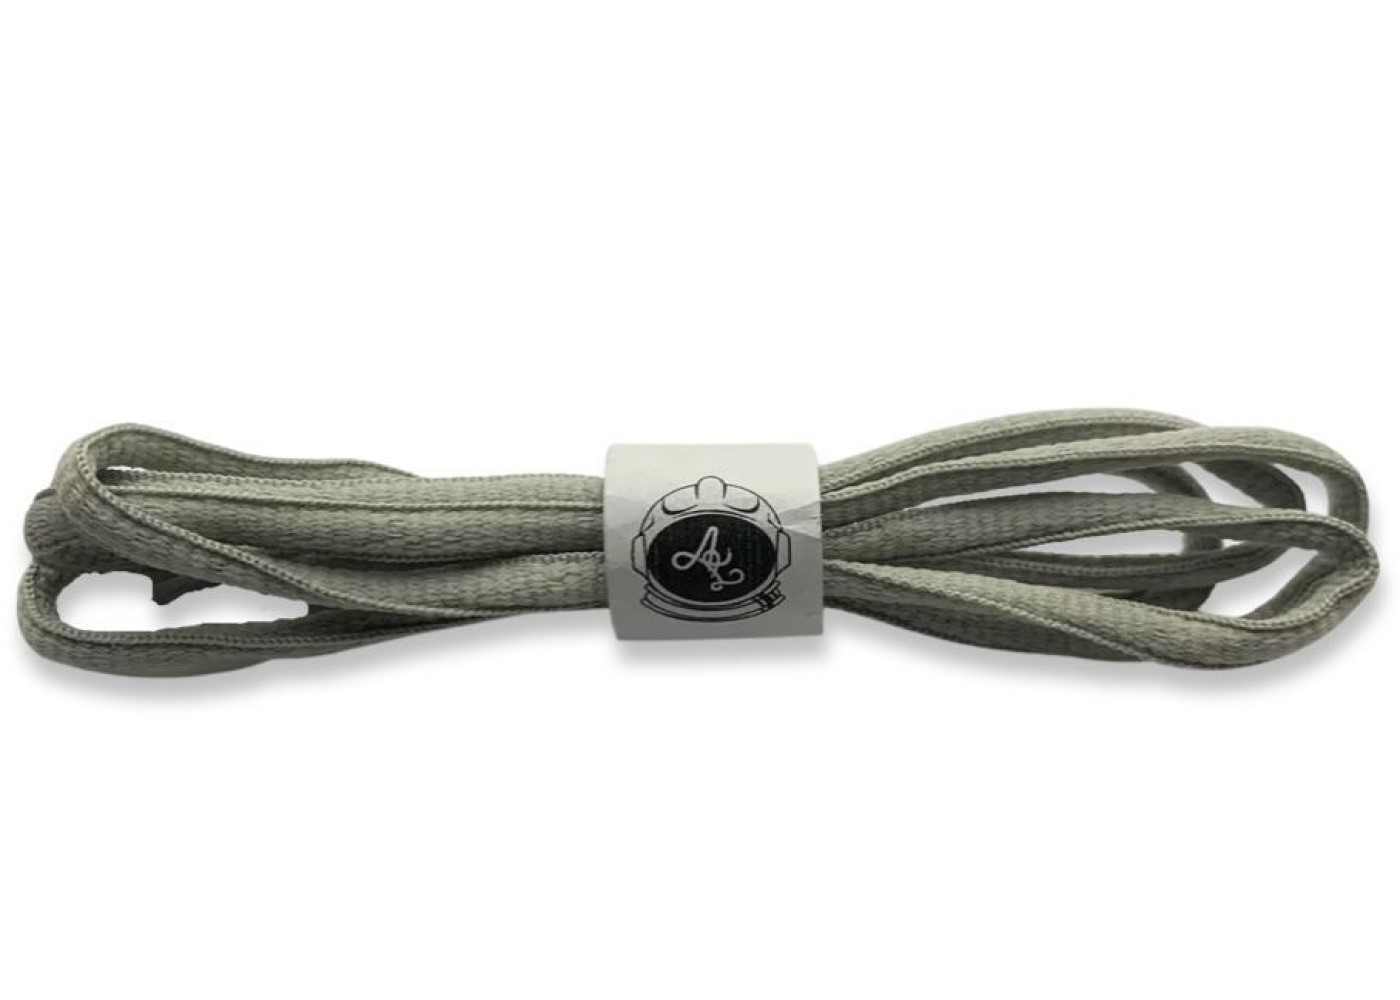 Astrolaces Oval Laces Grey